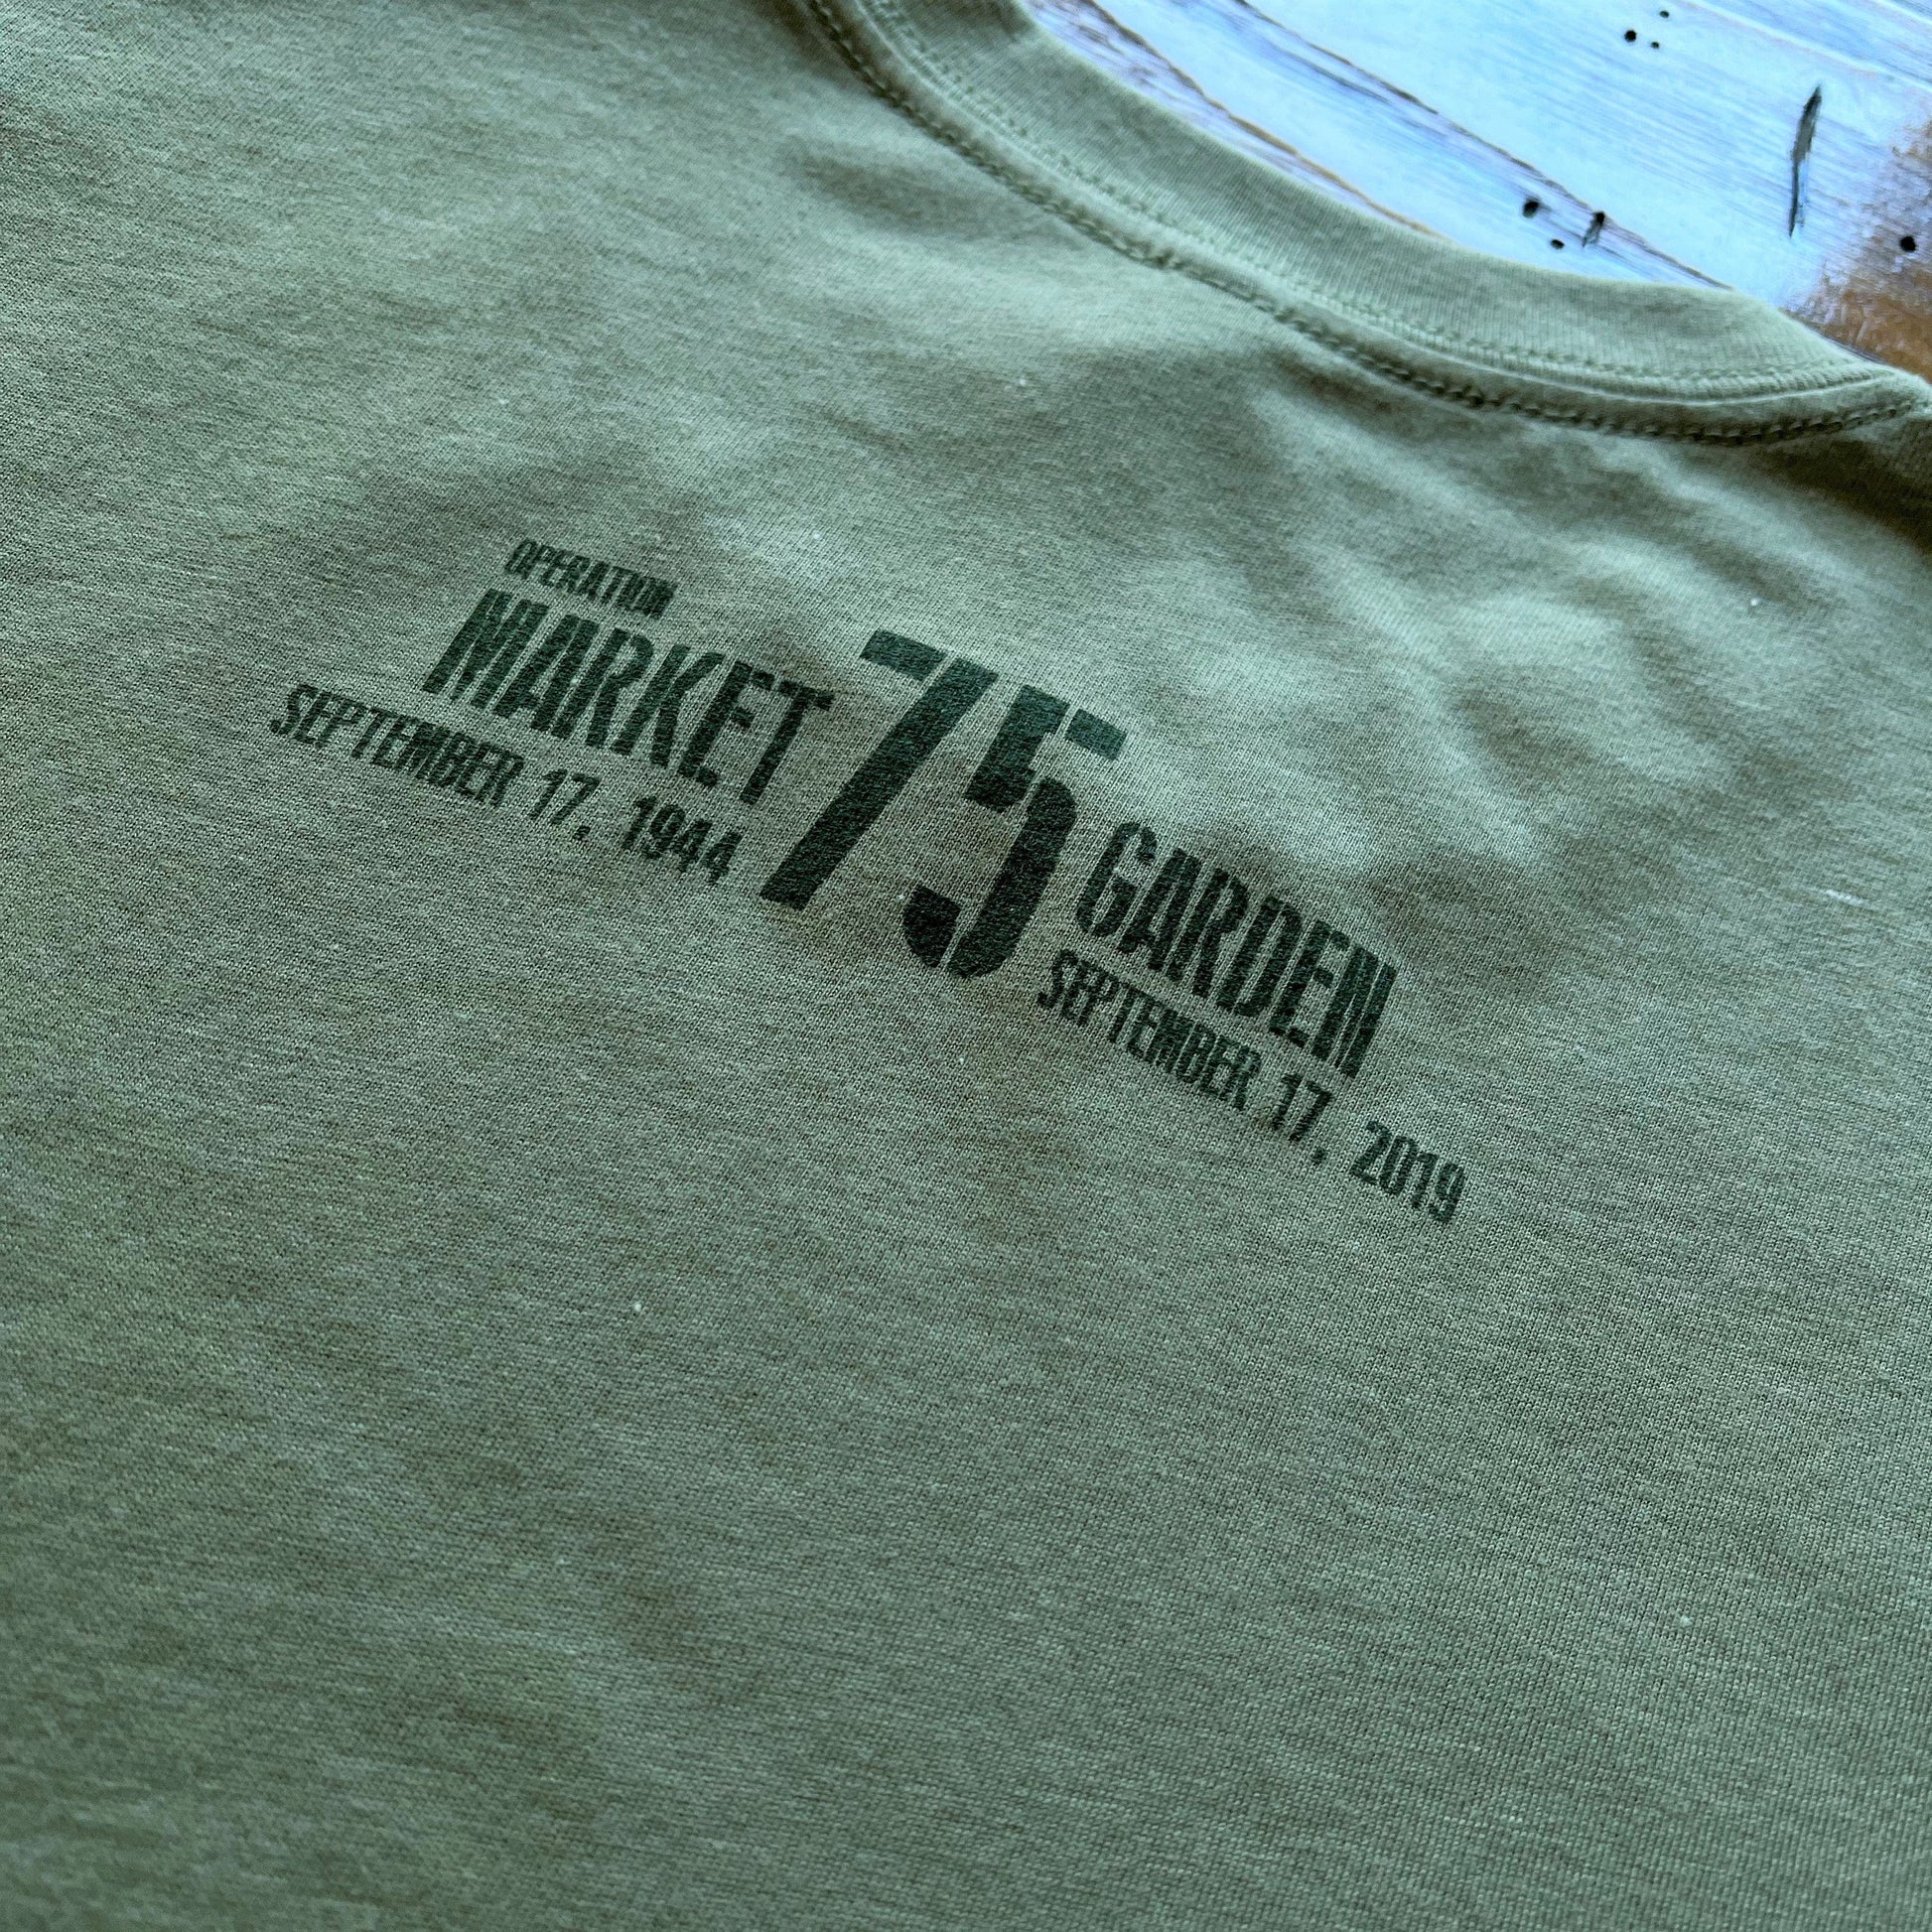 Back close-up of "Operation Market Garden" Shirt from The History List store